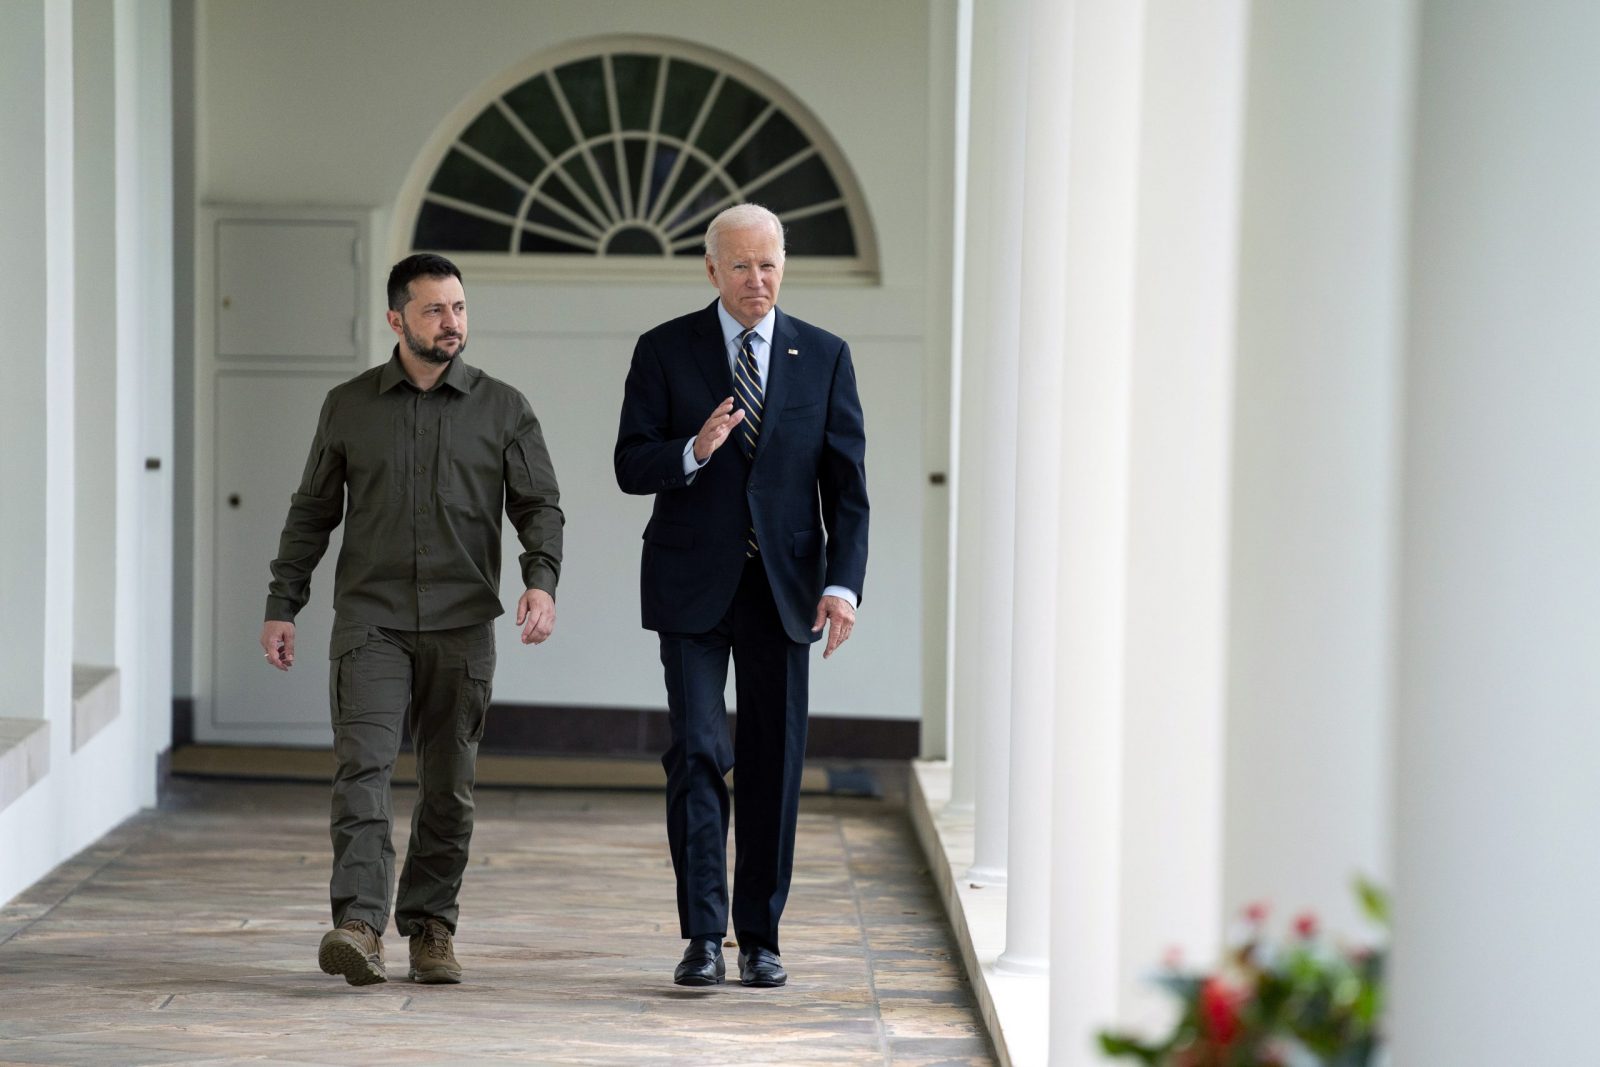 epa10875762 Ukrainian President Volodymyr Zelensky (L) walks down the White House colonnade towards the Oval Office with US President Joe Biden during a visit to the White House in Washington, DC, USA, 21 September 2023. Zelensky is in Washington meeting with members of Congress at the US Capitol, the Pentagon and US President Biden at the White House to make a case for further military aid.  EPA/Evan Vucci / POOL